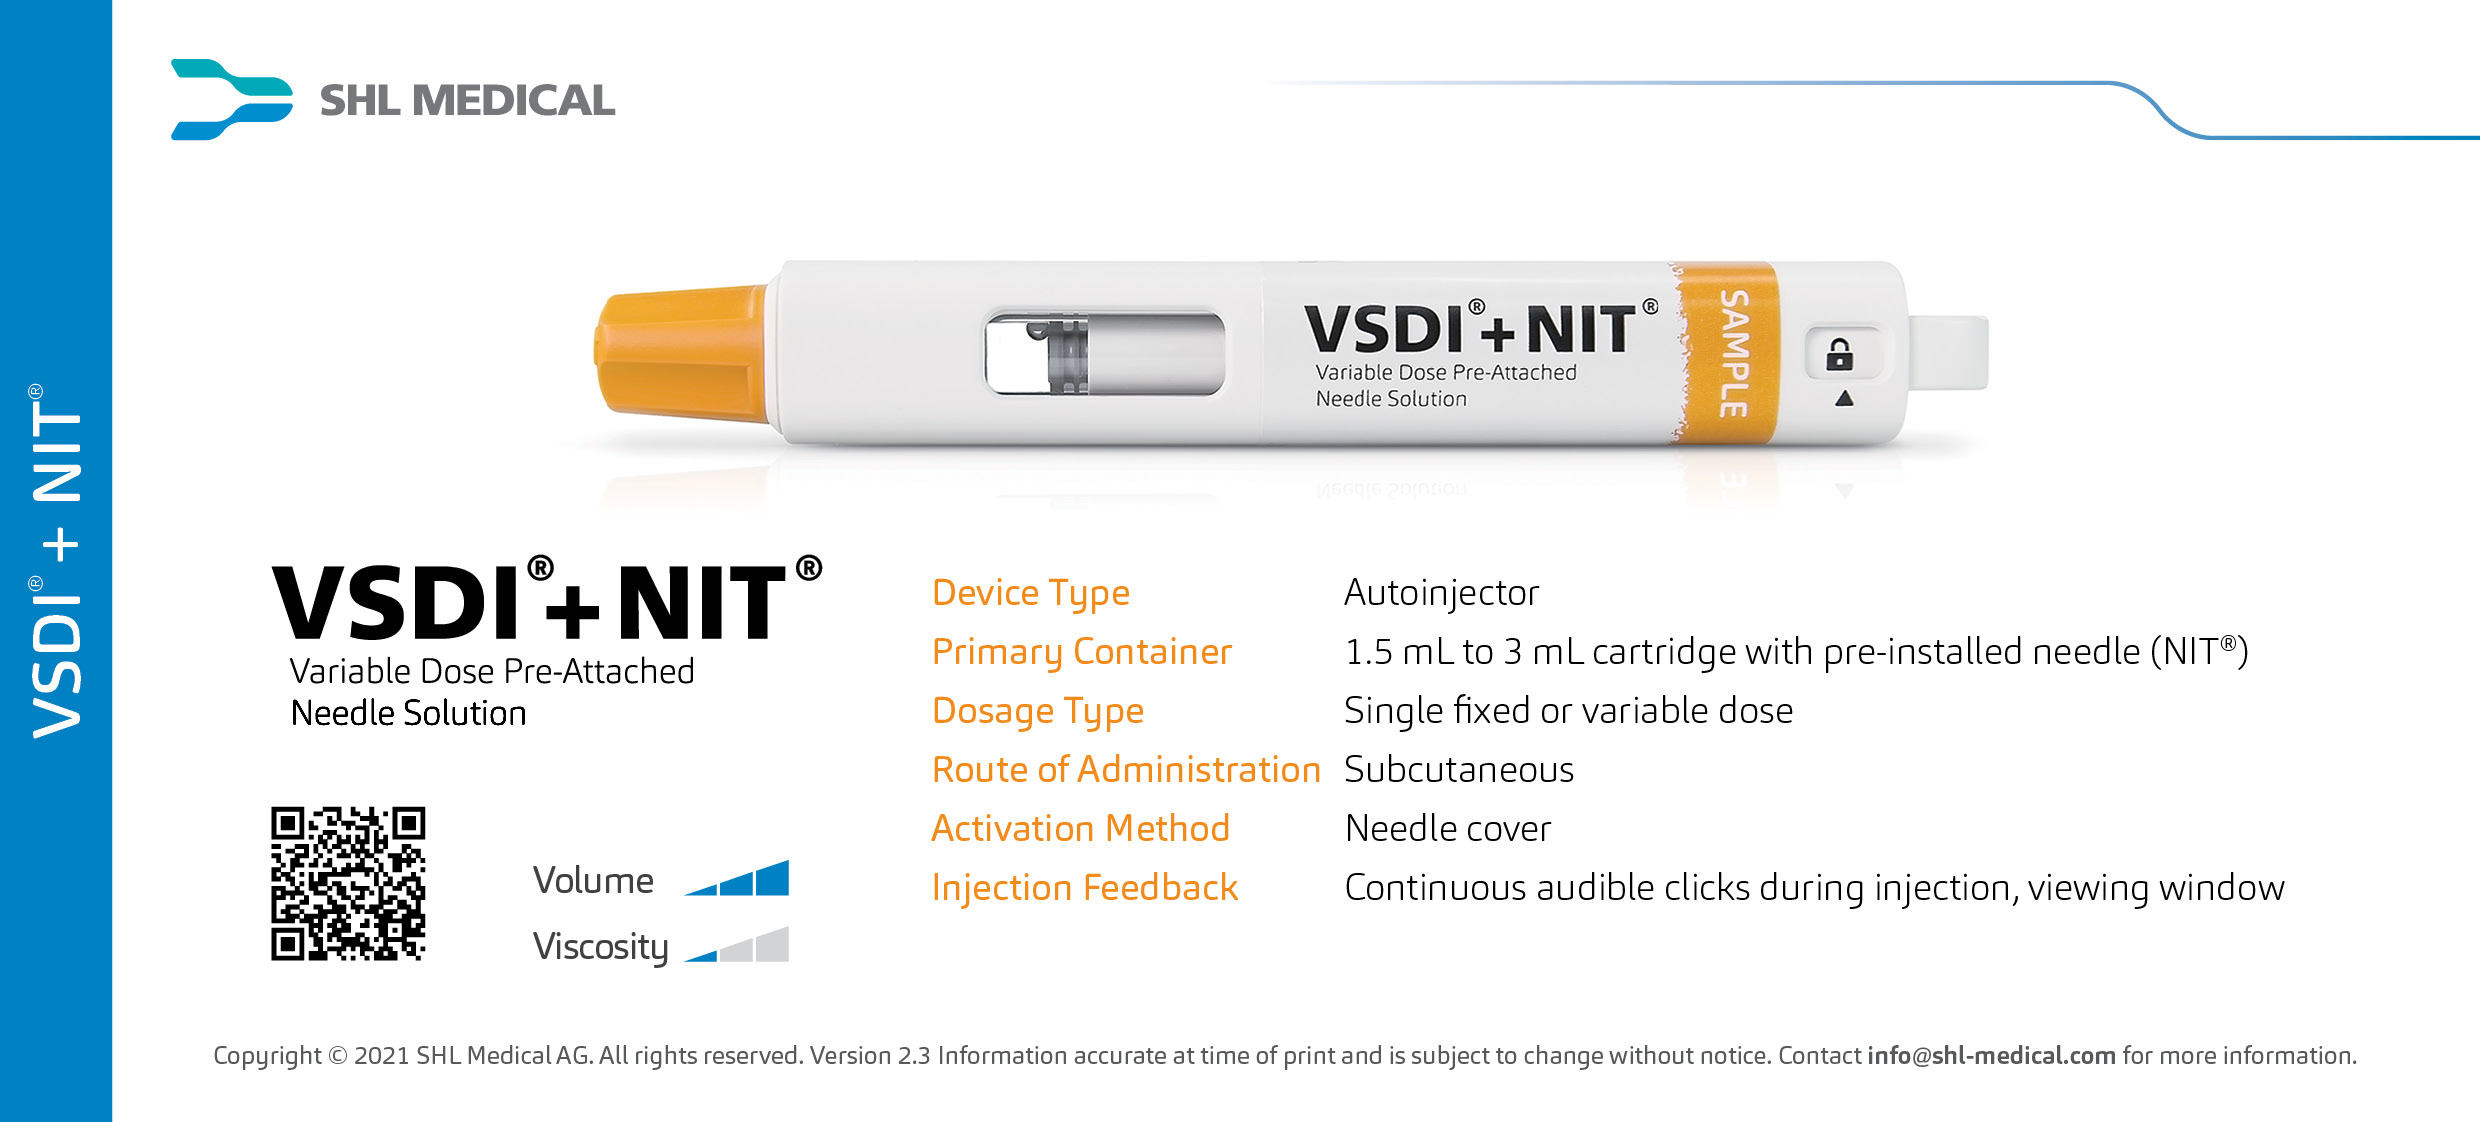 Product card of variable single dose VSDI® + NIT® cartridge-based autoinjector with pre-attached needle isolation technology (NIT) developed by SHL Medical featuring its device specifications and handling instructions